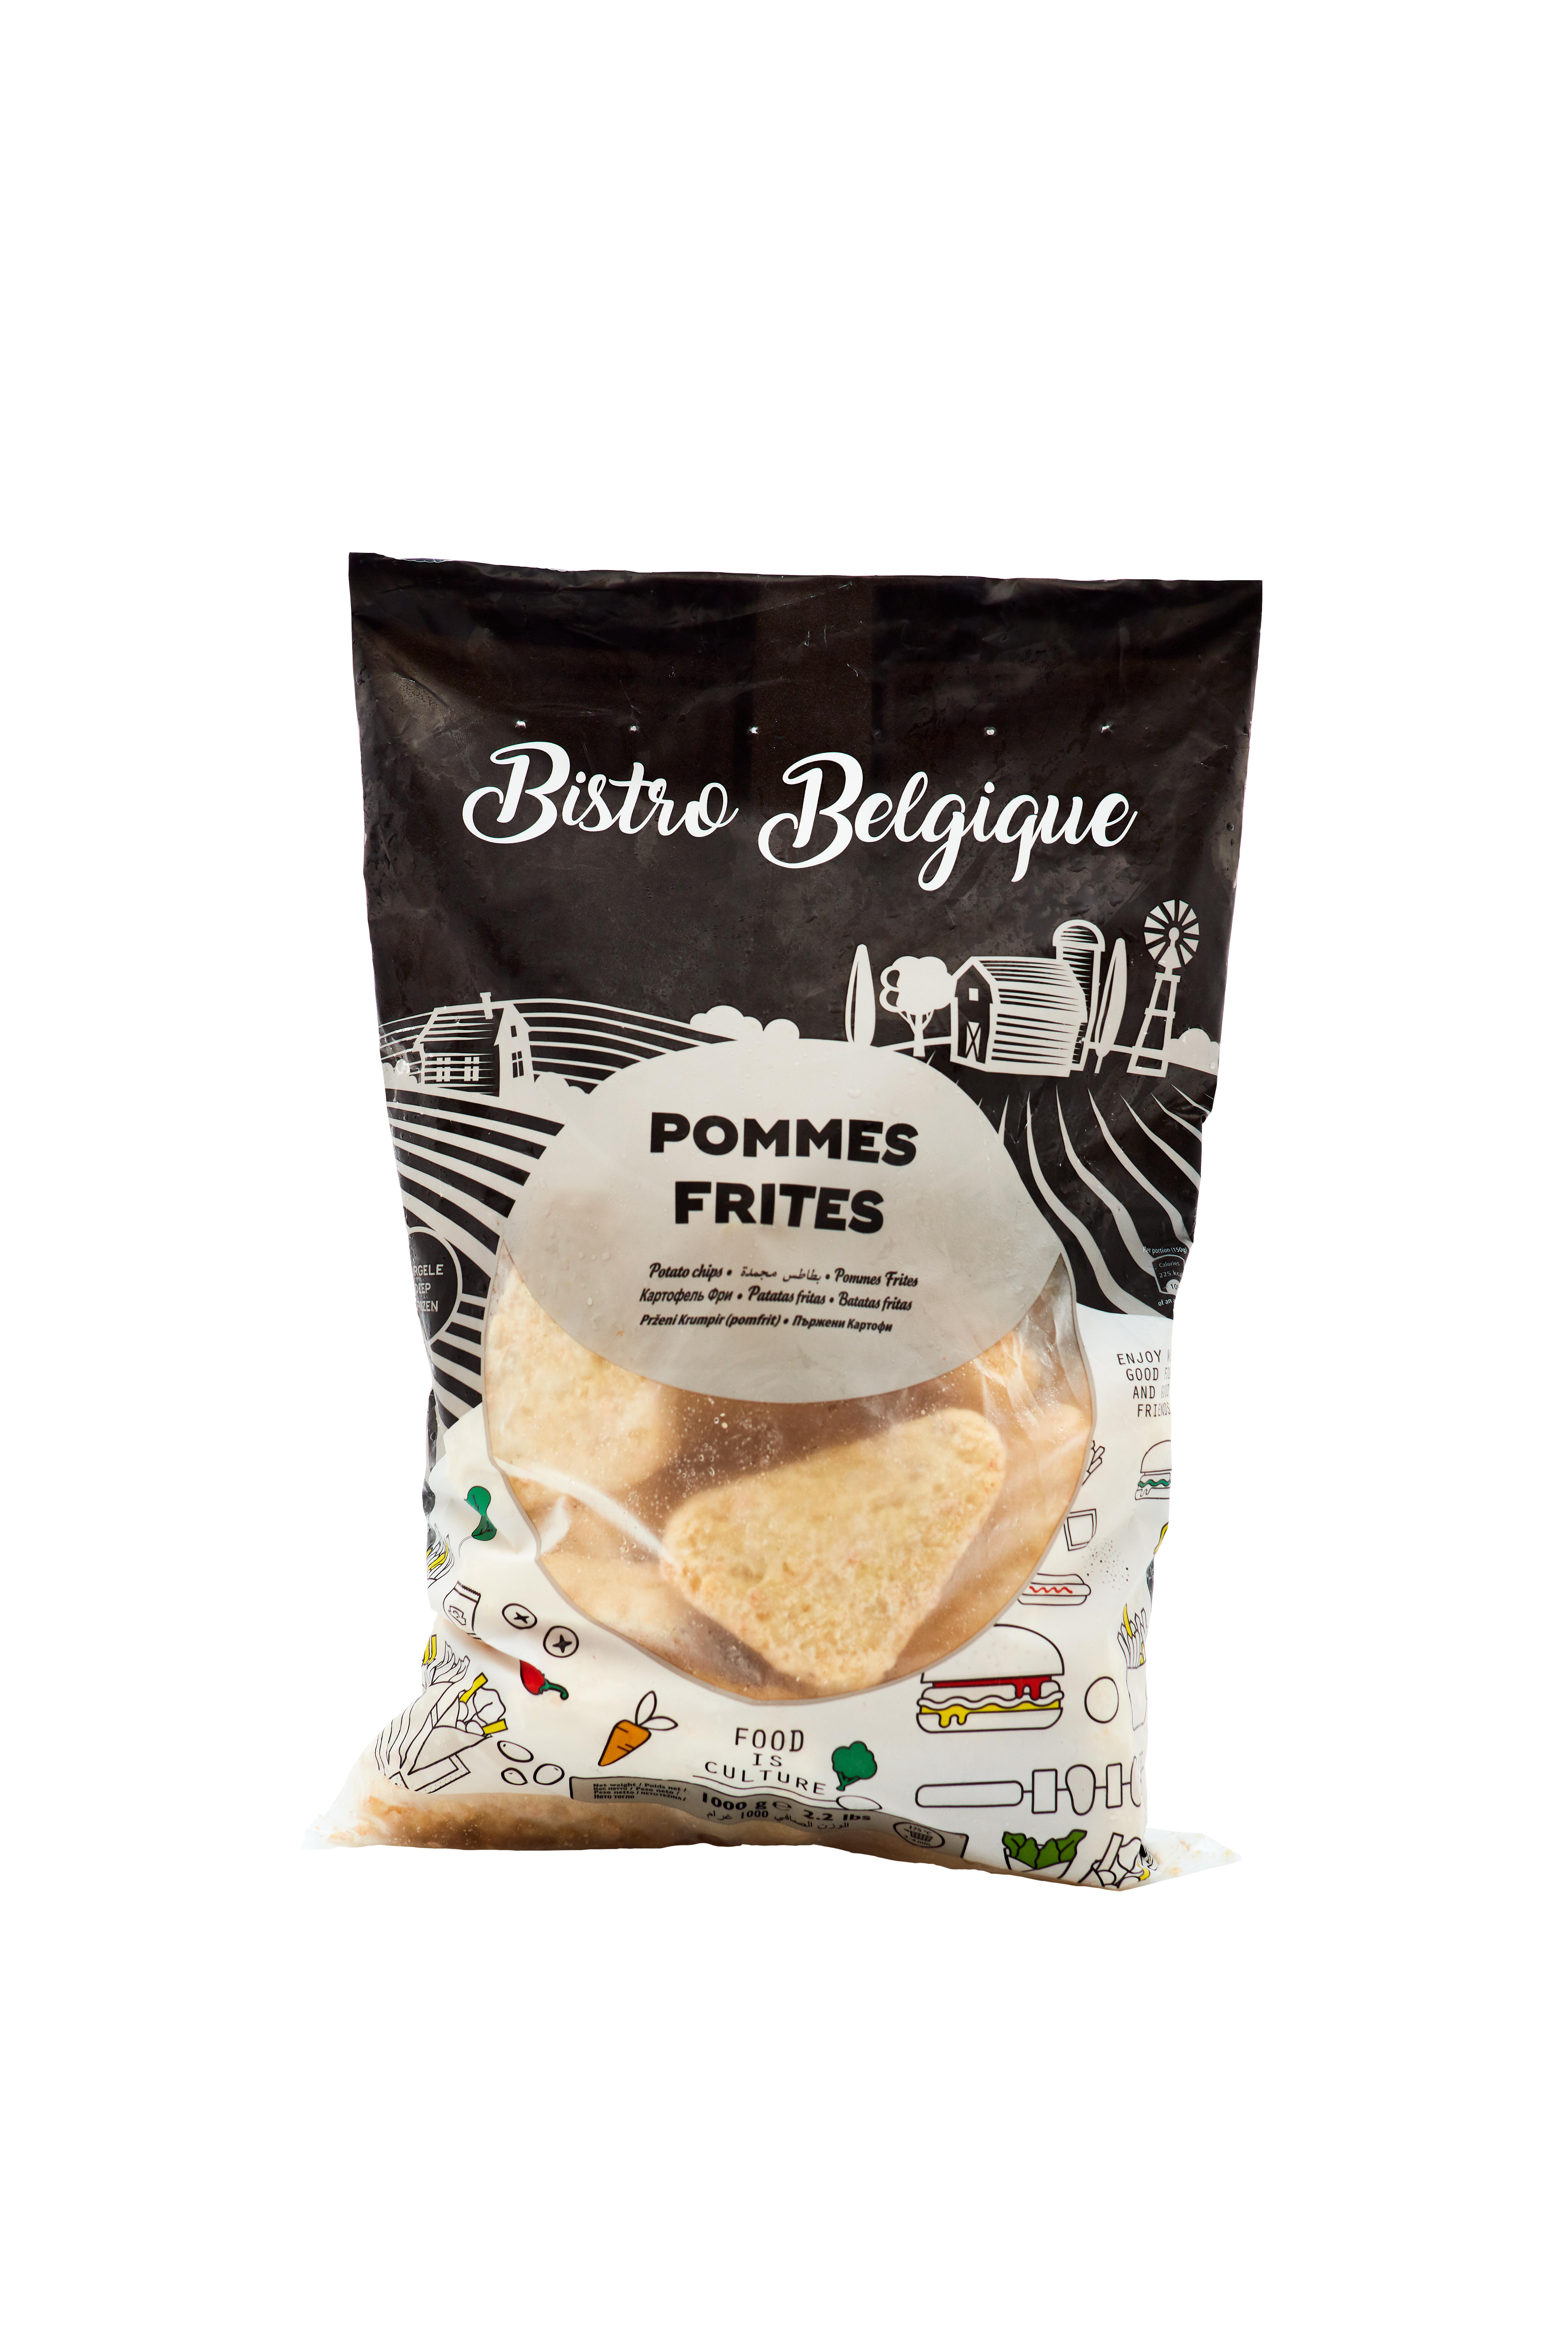 +/- 1-2.5kg Polybags Variable Weight Bistro Belgique Packing